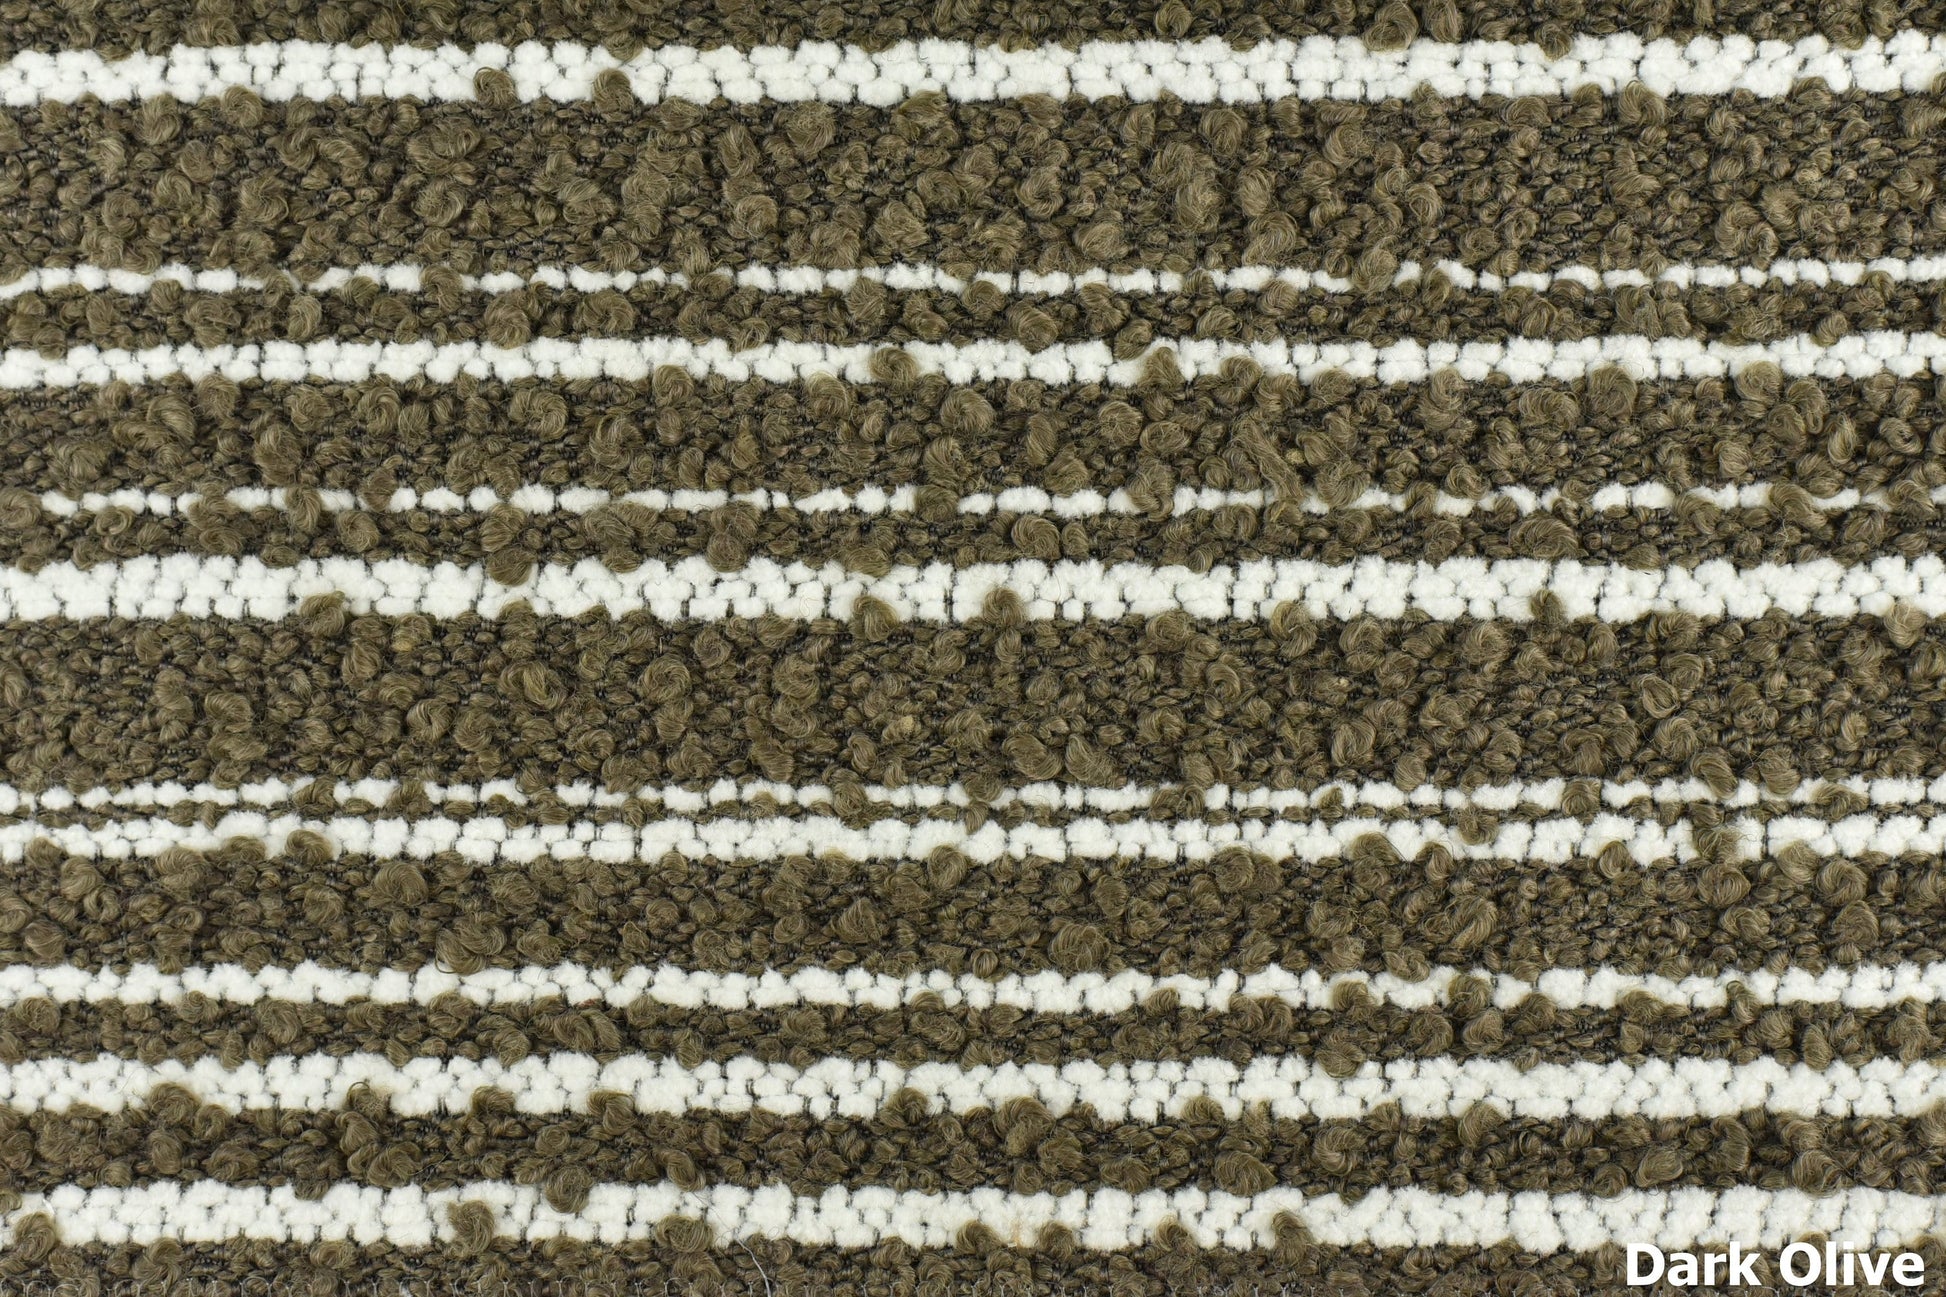 White Black Stripes Texture Boucle Upholstery Fabric|Musturd Yellow Boucle Fabric For Chair Soft Hand|Thick Green Boucle For Bench Ottoman Dark Olive